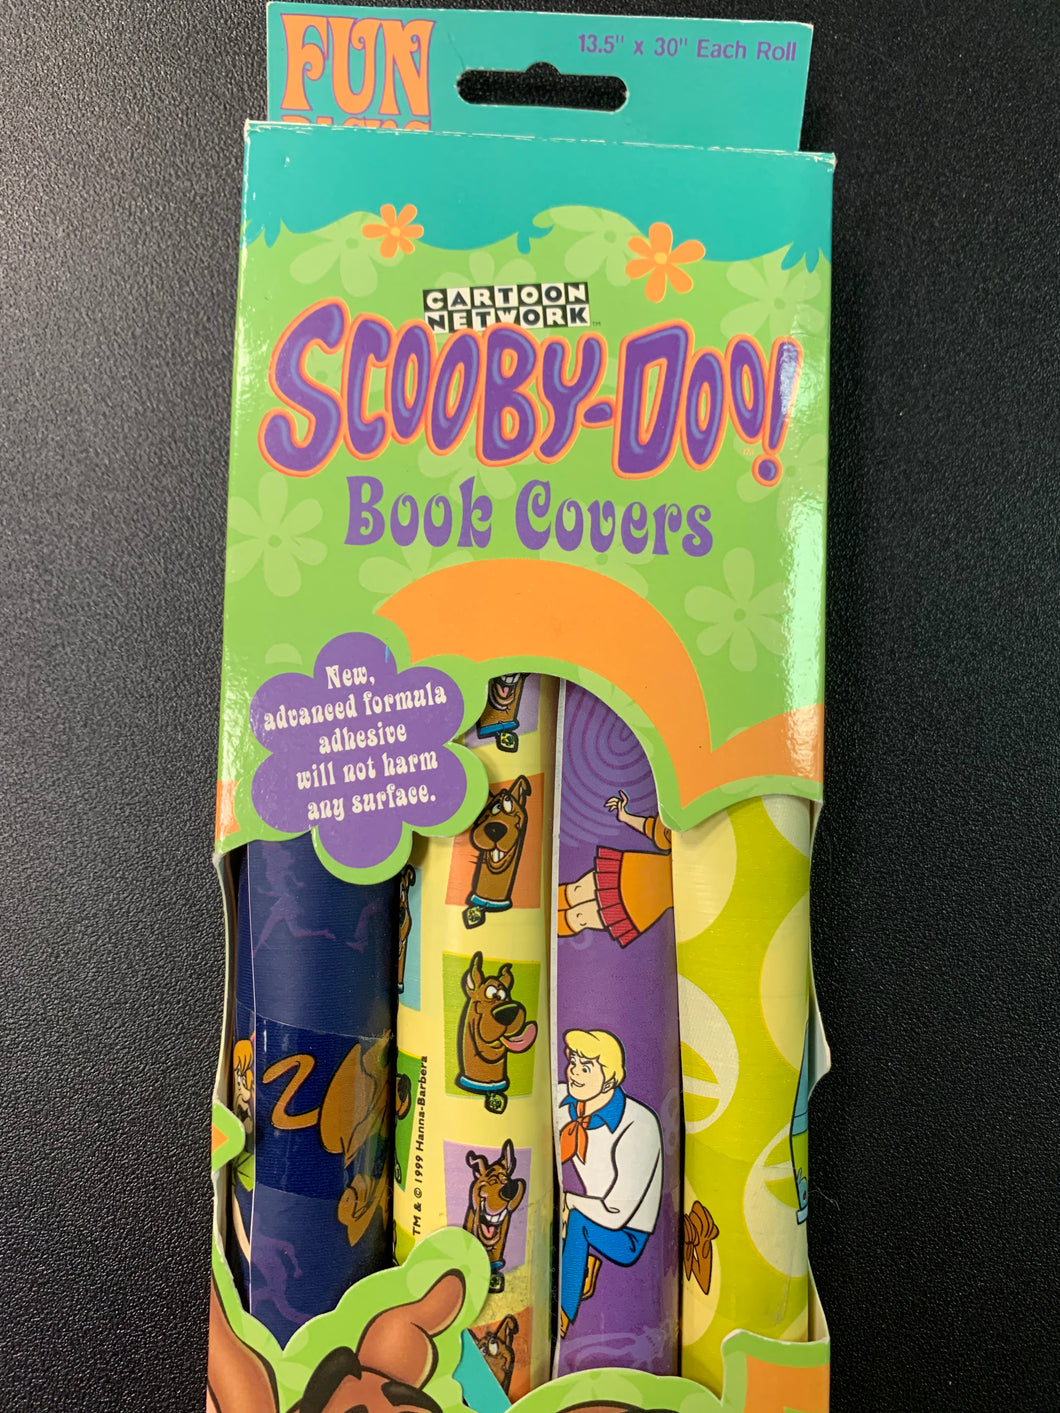 KITTRICH SCOOBY-DOO BOOK COVERS